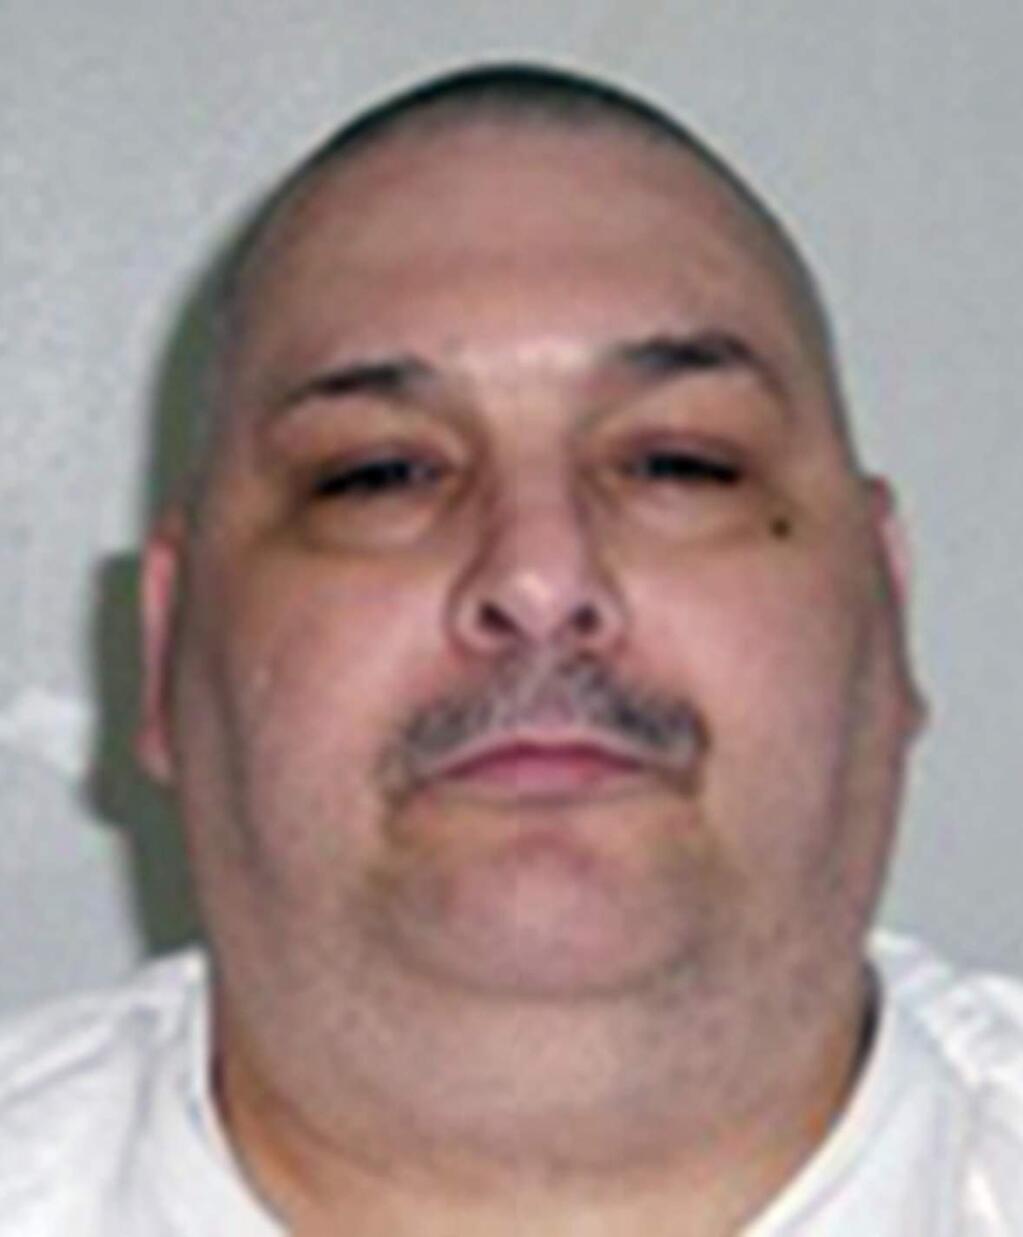 FILE - This undated file photo provided by the Arkansas Department of Correction shows death-row inmate Jack Jones, who is one of two Arkansas killers set to die Monday, April 24, 2017, in the nation's first double execution in more than 16 years. Jones was given the death penalty for the 1995 rape and killing of Mary Phillips. (Arkansas Department of Correction via AP, File)